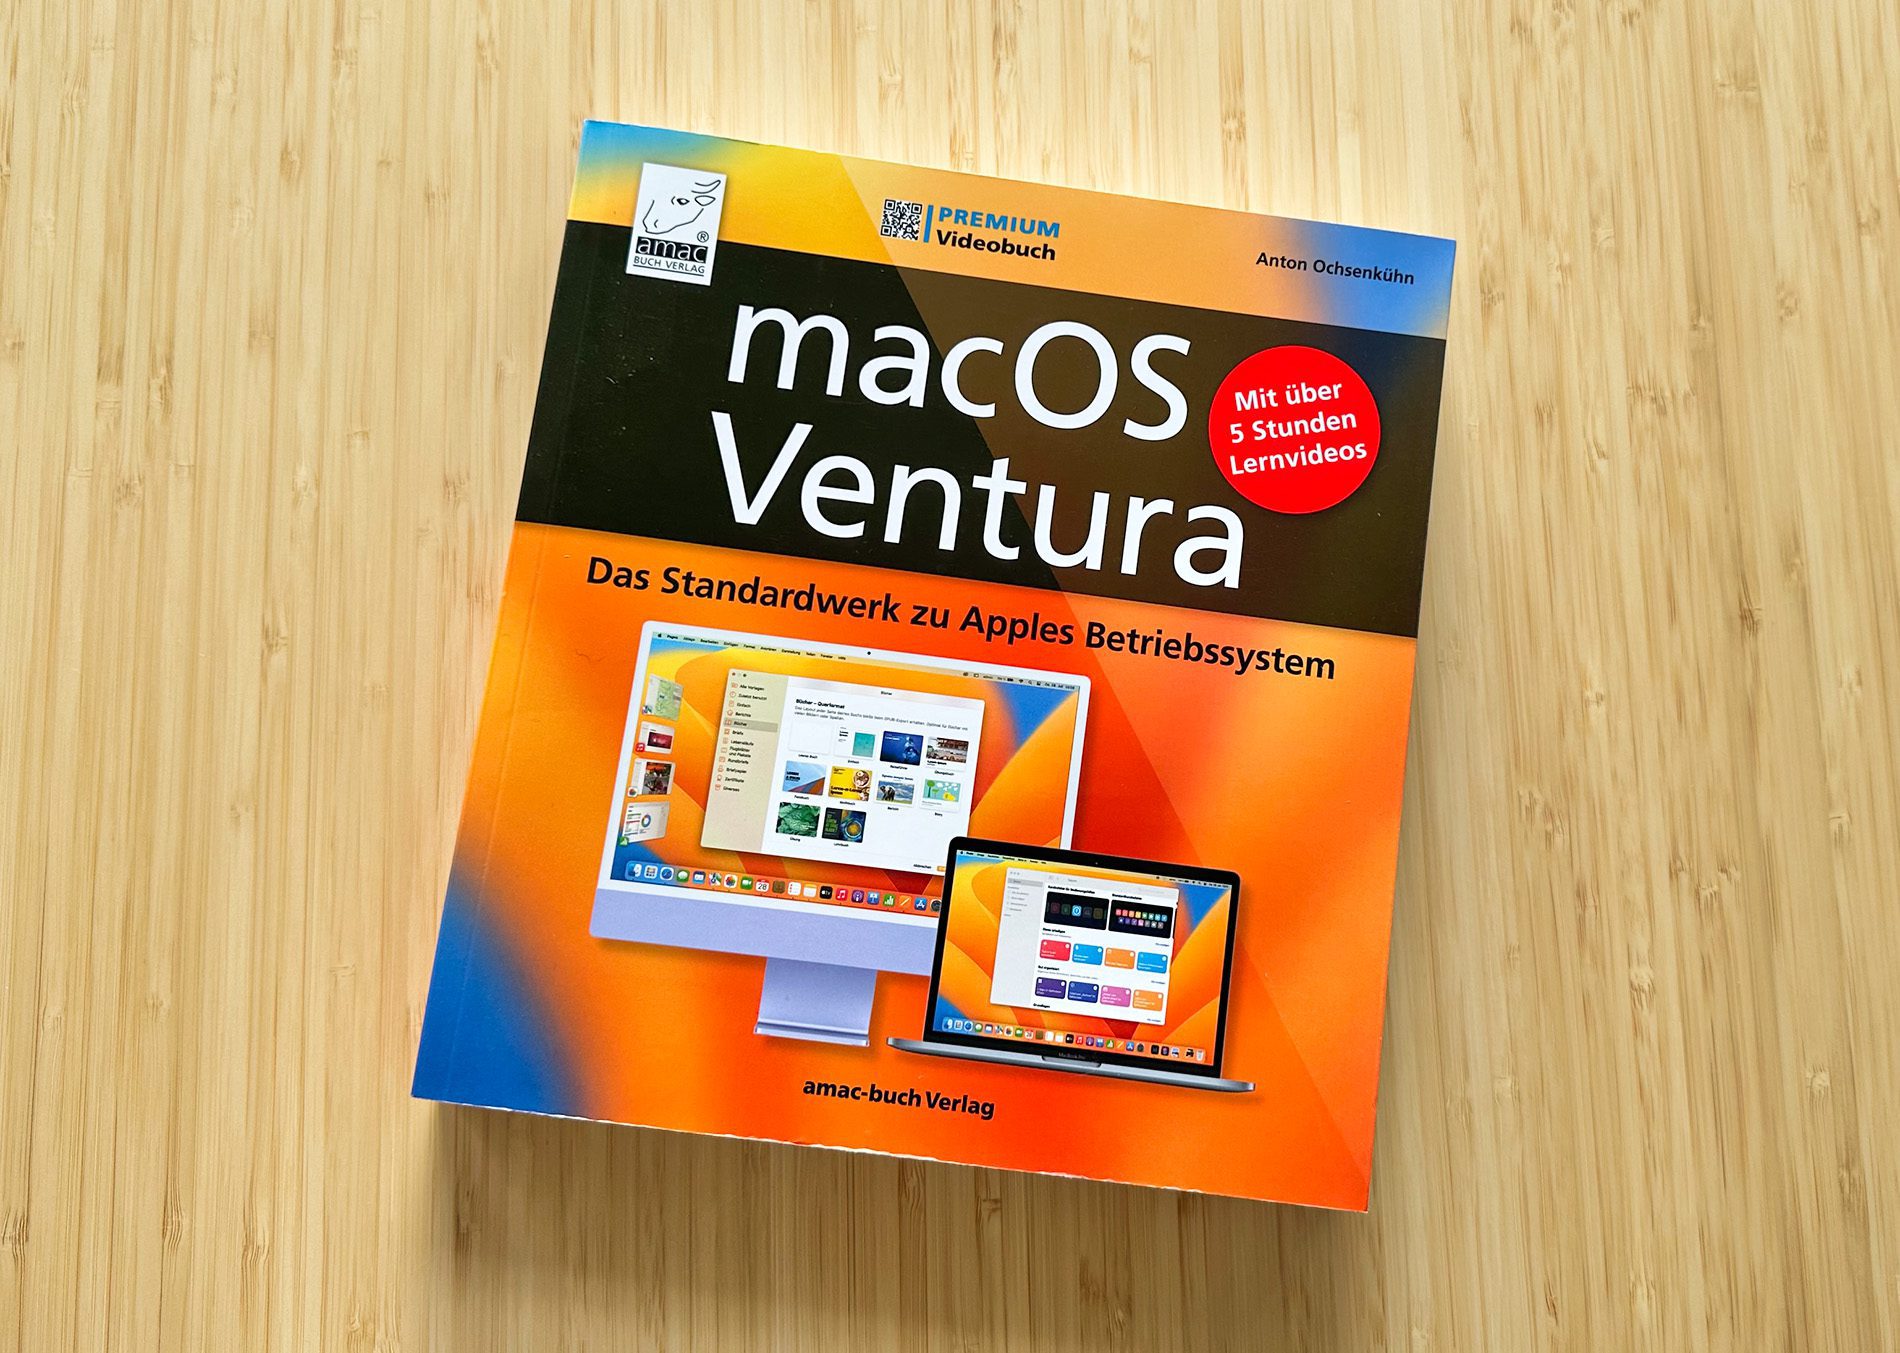 The macOS Ventura manual by Anton Ochsenkühn brings together a good 560 pages. Concentrated knowledge that is not only helpful for beginners (photos: Sir Apfelot).